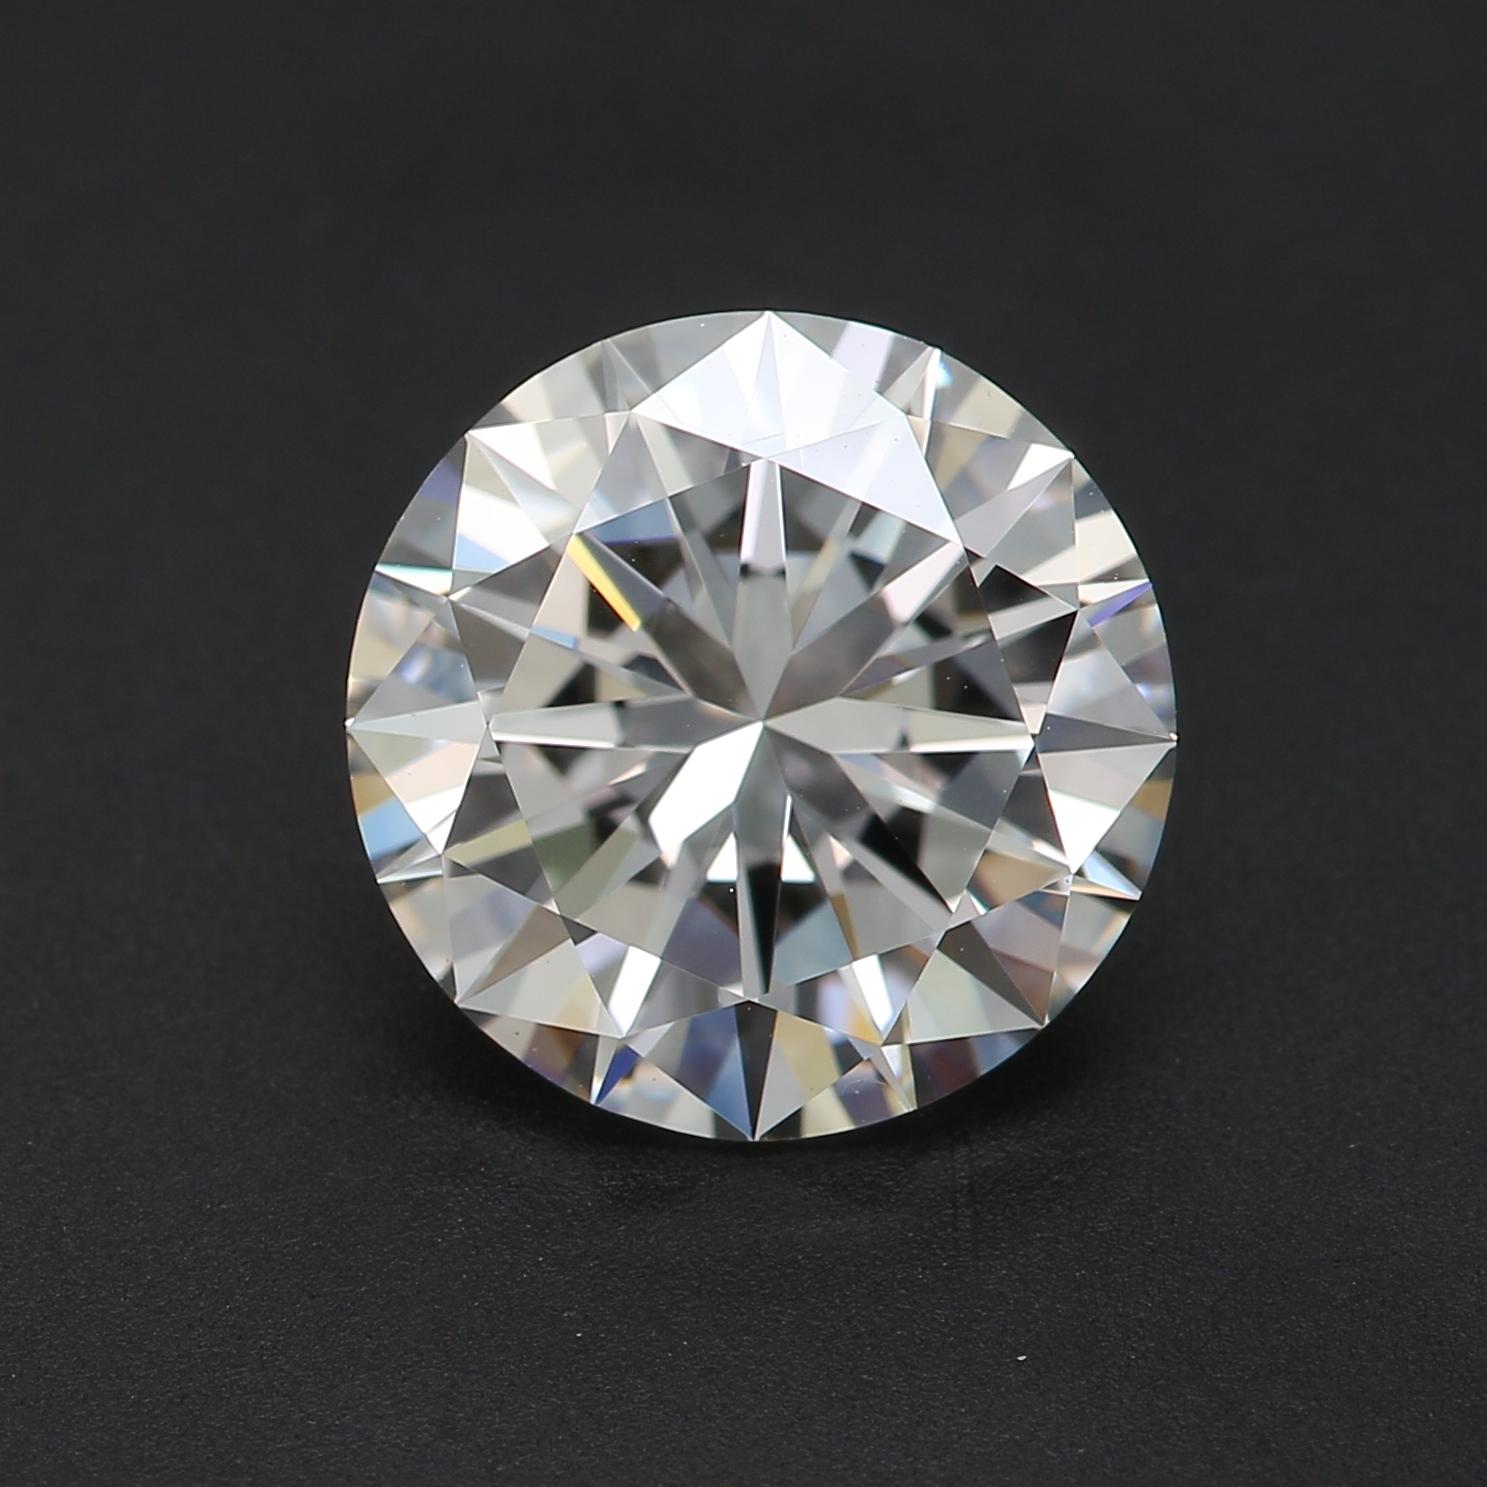 *100% NATURAL FANCY COLOUR DIAMOND*

✪ Diamond Details ✪

➛ Shape: Round
➛ Colour Grade: E
➛ Carat: 2.02
➛ Clarity: VVS1
➛ GIA Certified 

^FEATURES OF THE DIAMOND^

This 2.02-carat diamond is a diamond that weighs approximately 404 milligrams. The